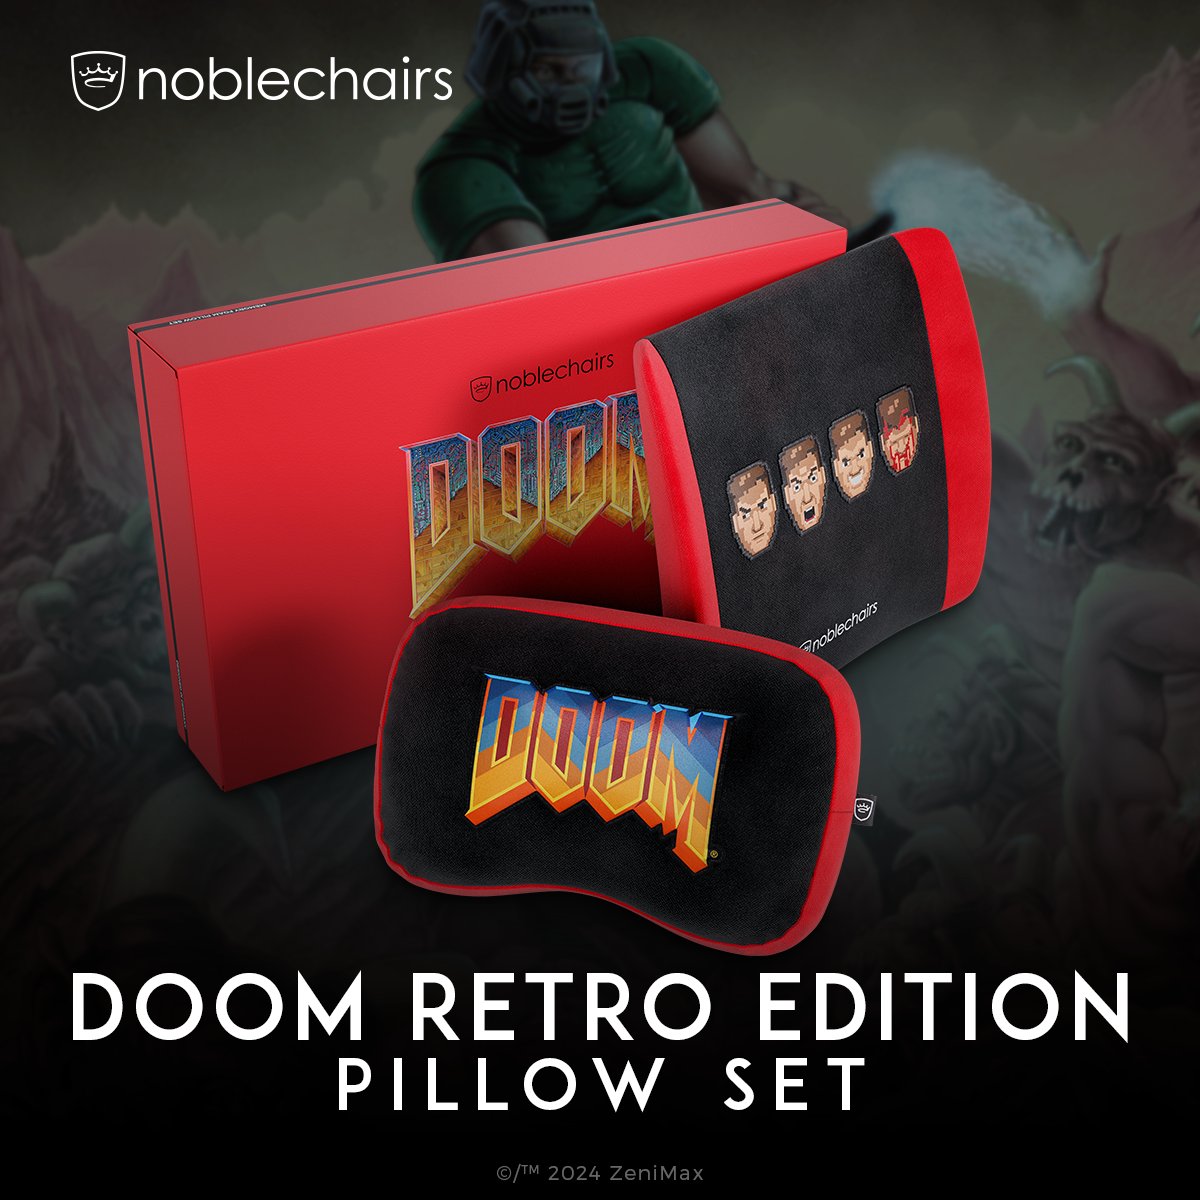 With our DOOM Retro Pillow Set, we're bringing the past back to the future. Rip and Tear: nbl.club/DOOMRETROX